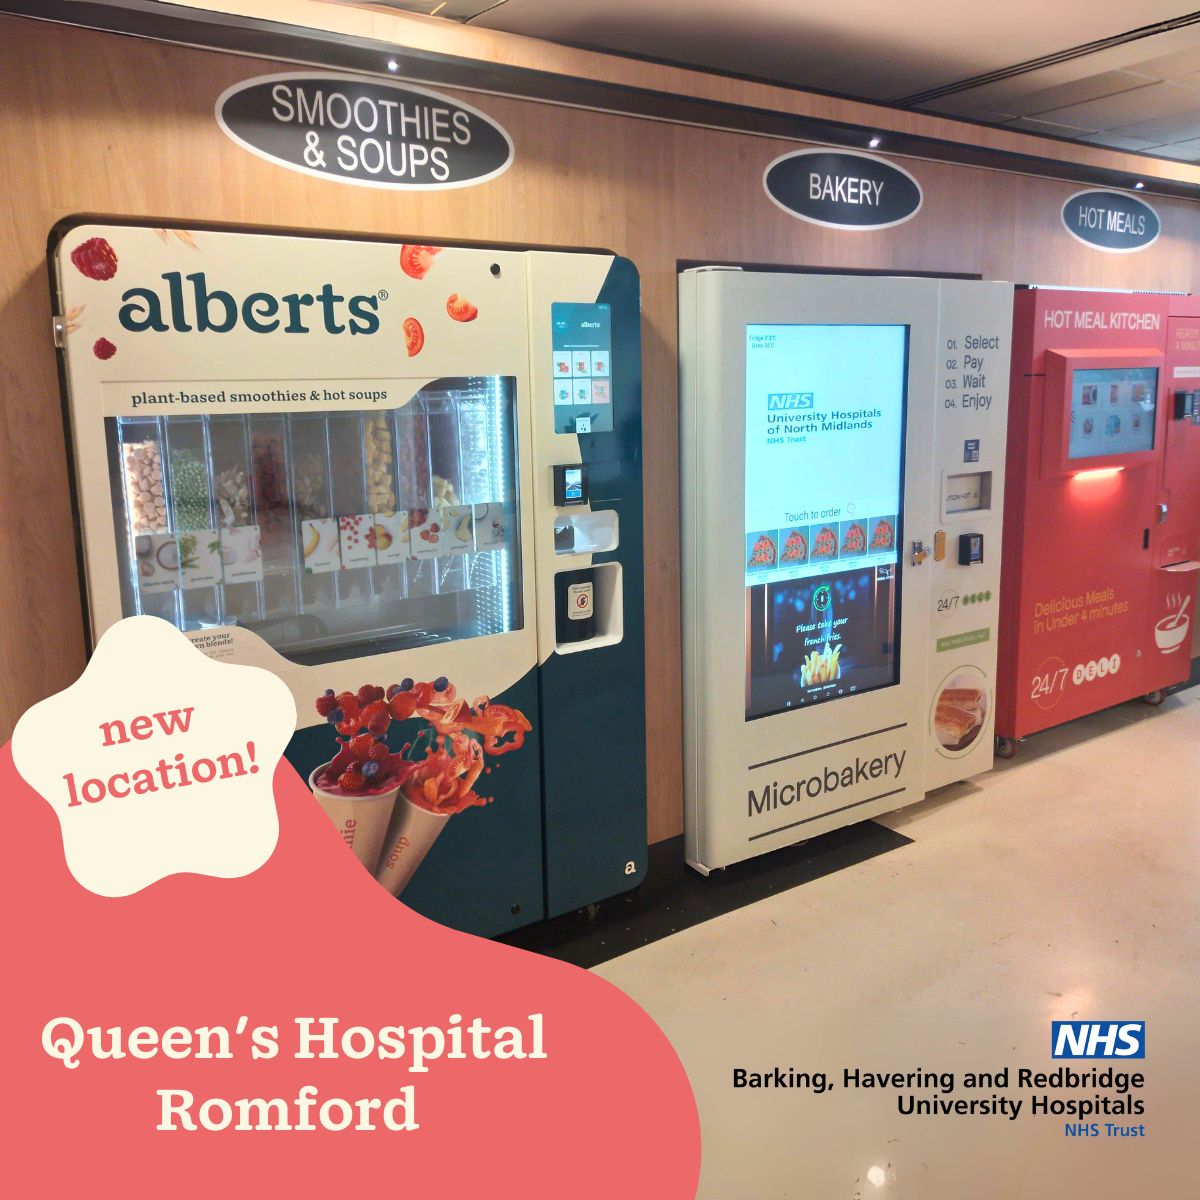 Just launched a new #AlbertsOne machine at the 24/7 Deli at NHS Queen's Hospital in Romford, UK! ✨ 🥣🥤We’re proud to provide a healthy option with our soup and smoothie blends! A special shoutout to all the teams that made this possible! 👏 💚